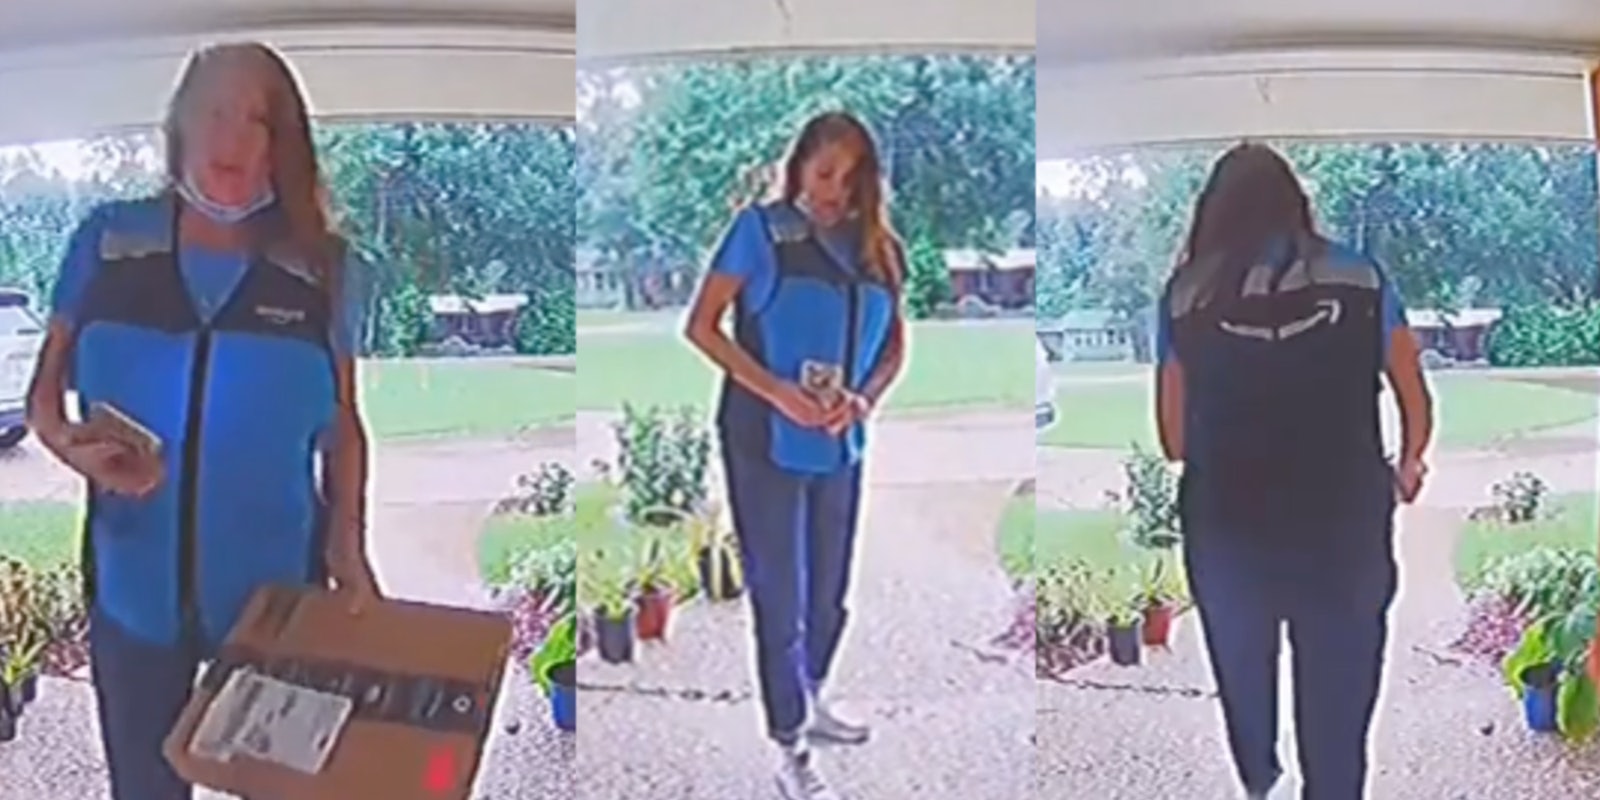 amazon delivery driver with package in hand, amazon deliver driver taking photo of package, amazon delivery driver walking away from front porch with package in hand